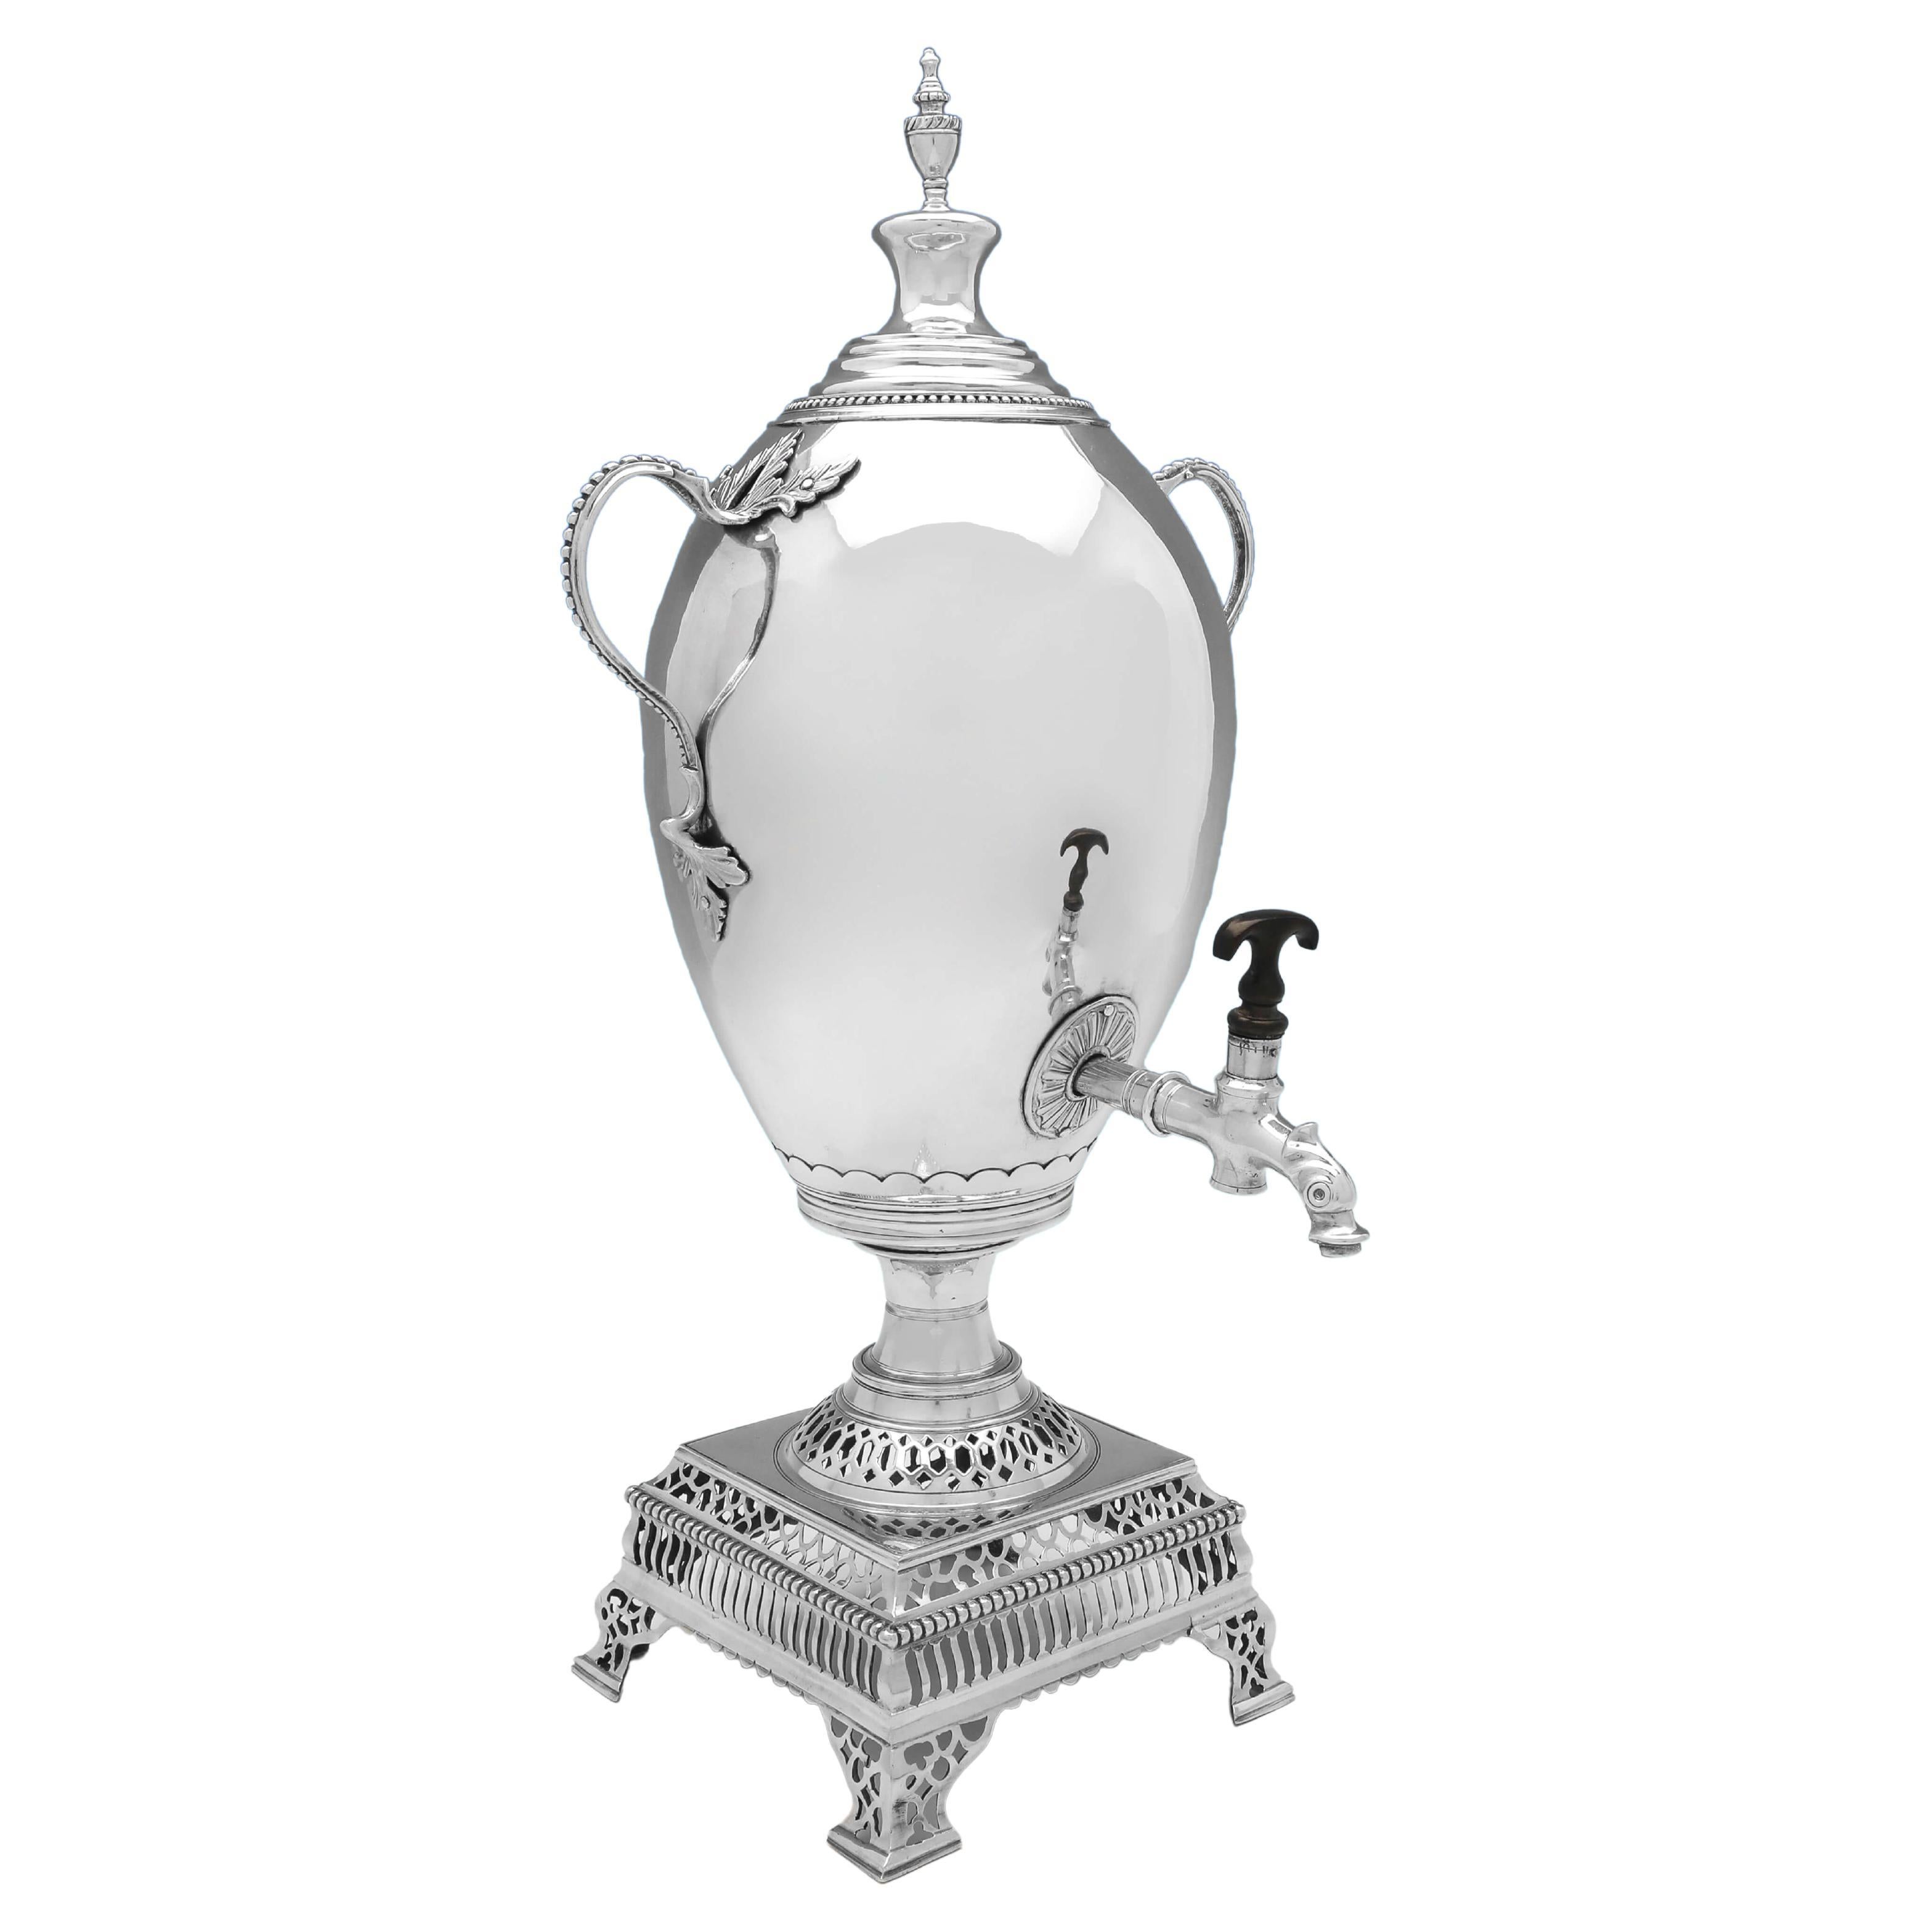 Victorian Silver Plated Tea Urn with Hot Iron Holder, circa 1860 For Sale